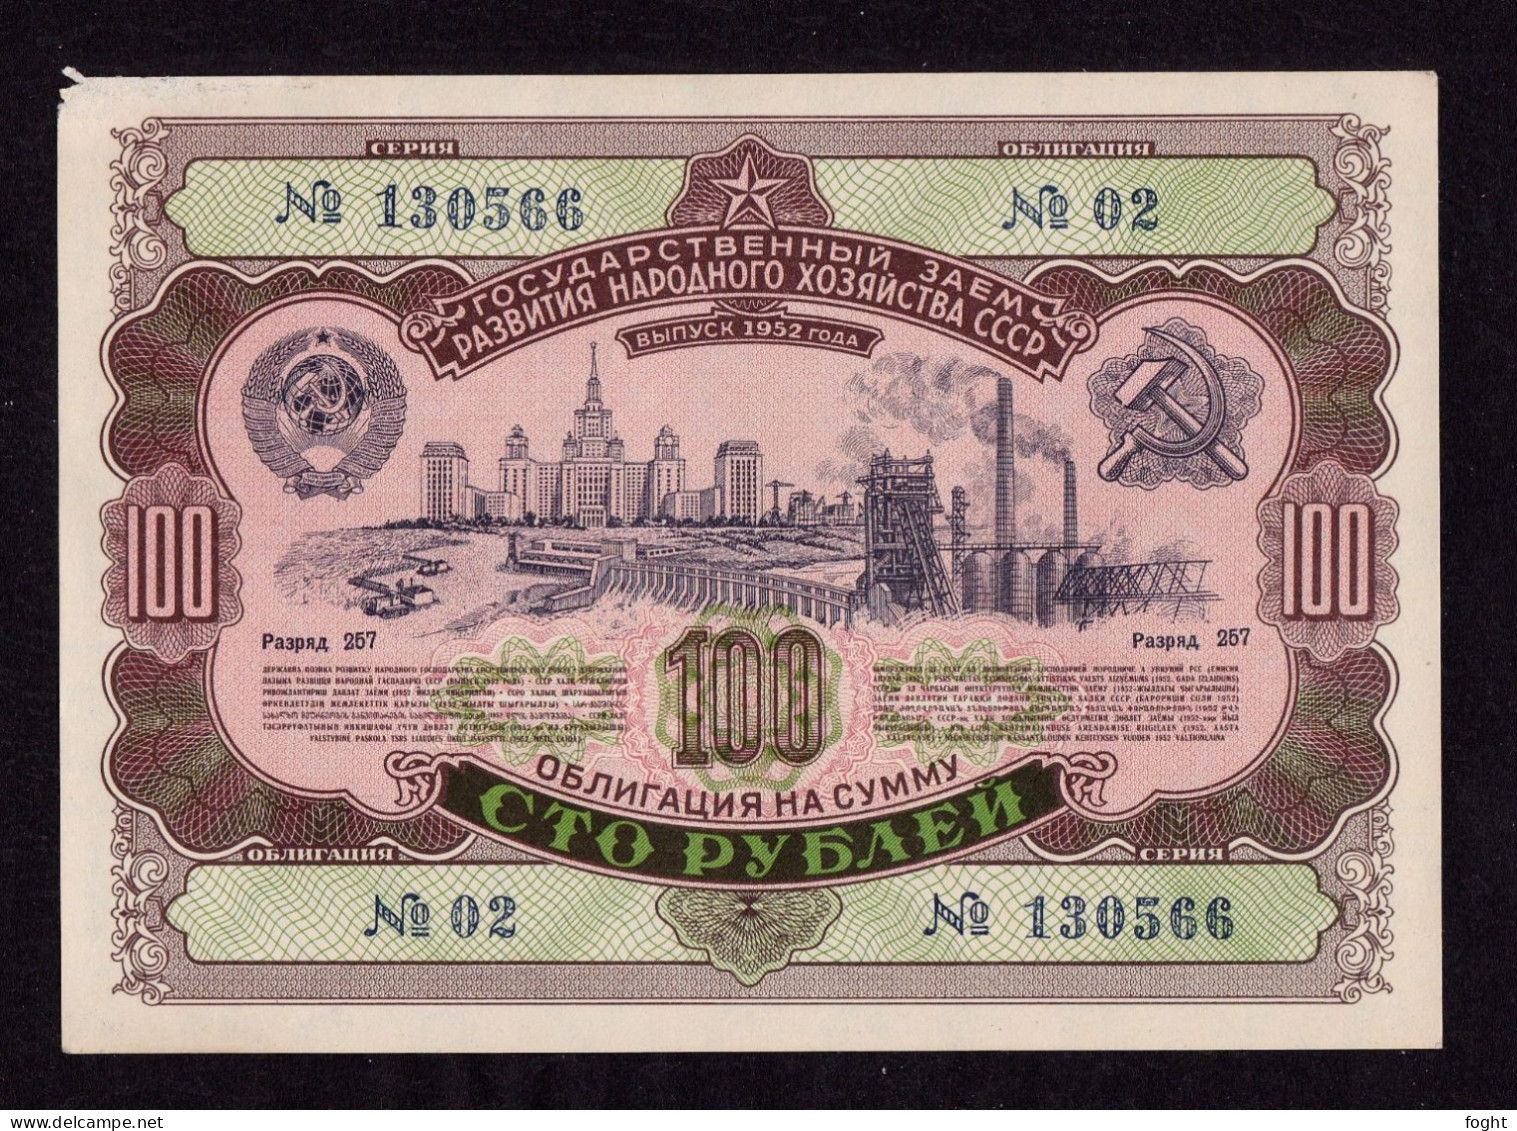 1952 Russia 100 Roubles State Loan Bond - Russia